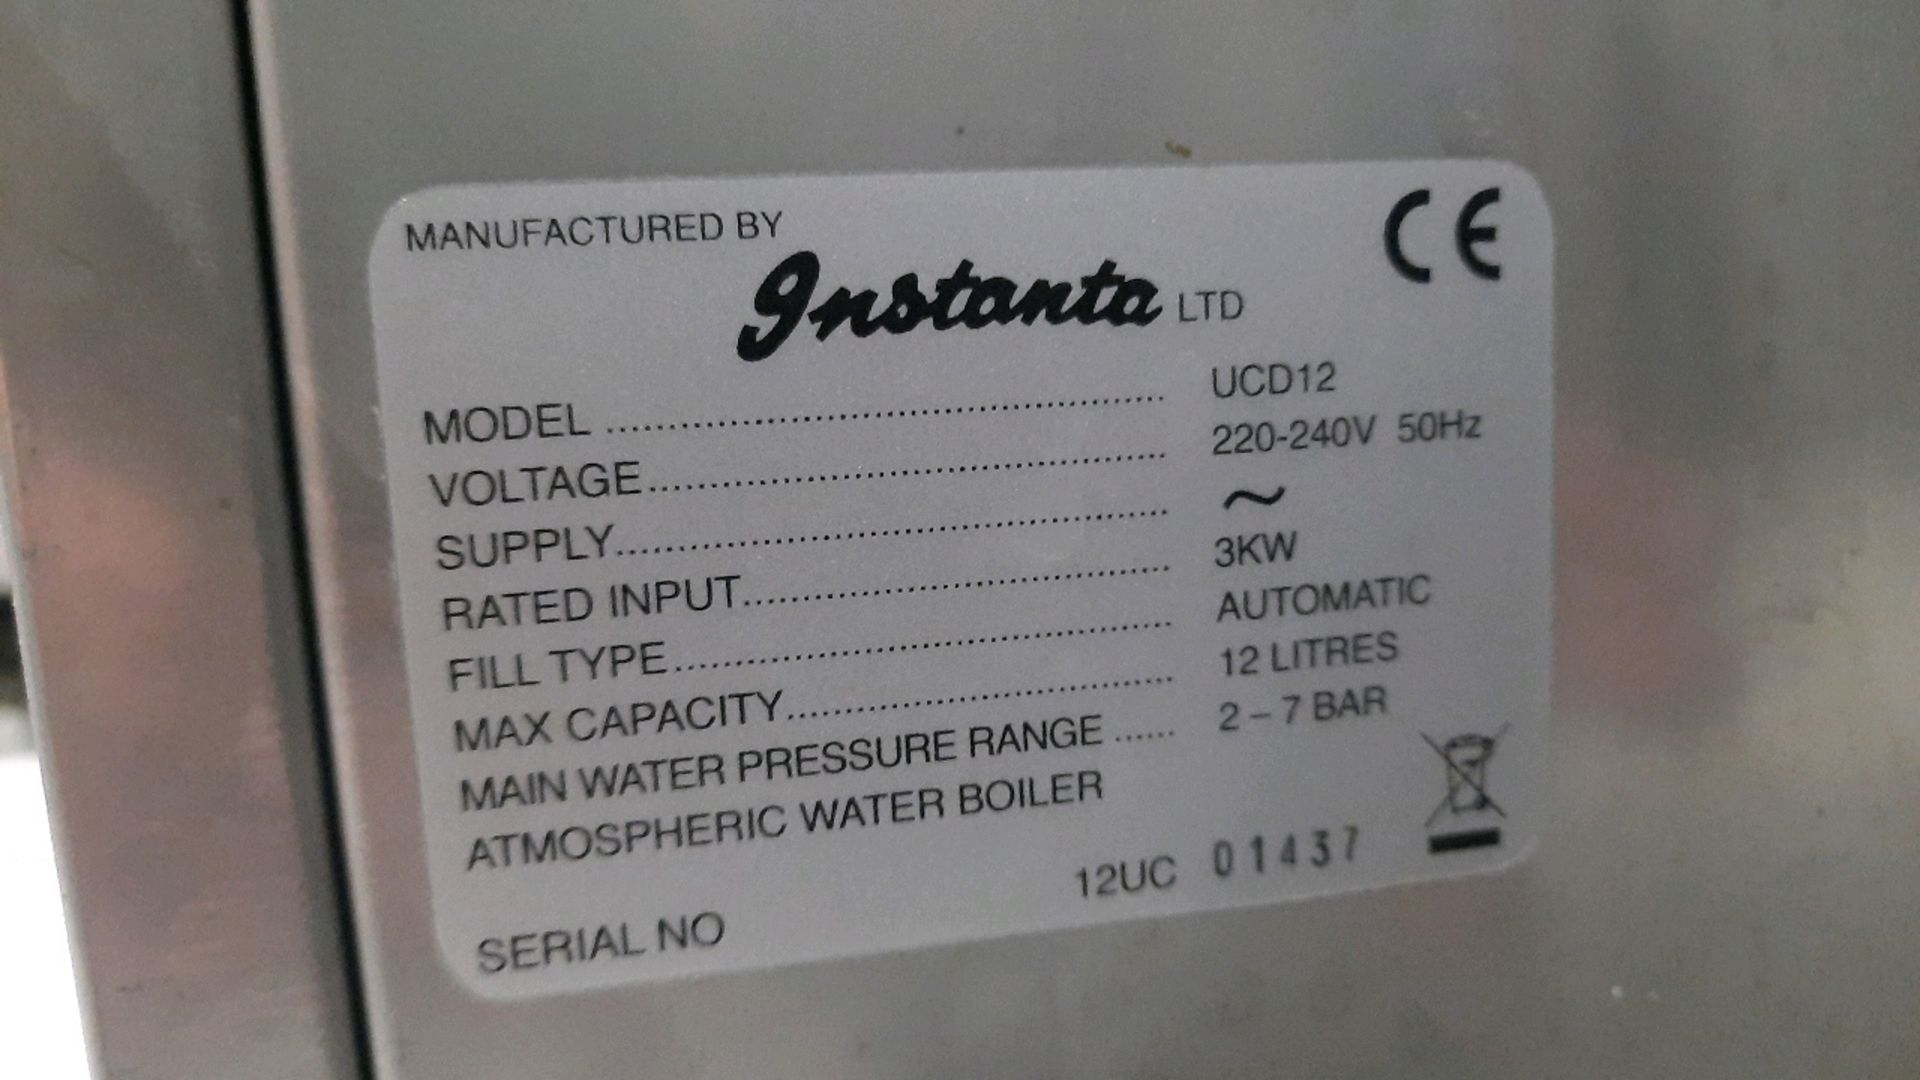 Instanta Stainless Steel Counter Hot Water Dispenser - Image 4 of 5